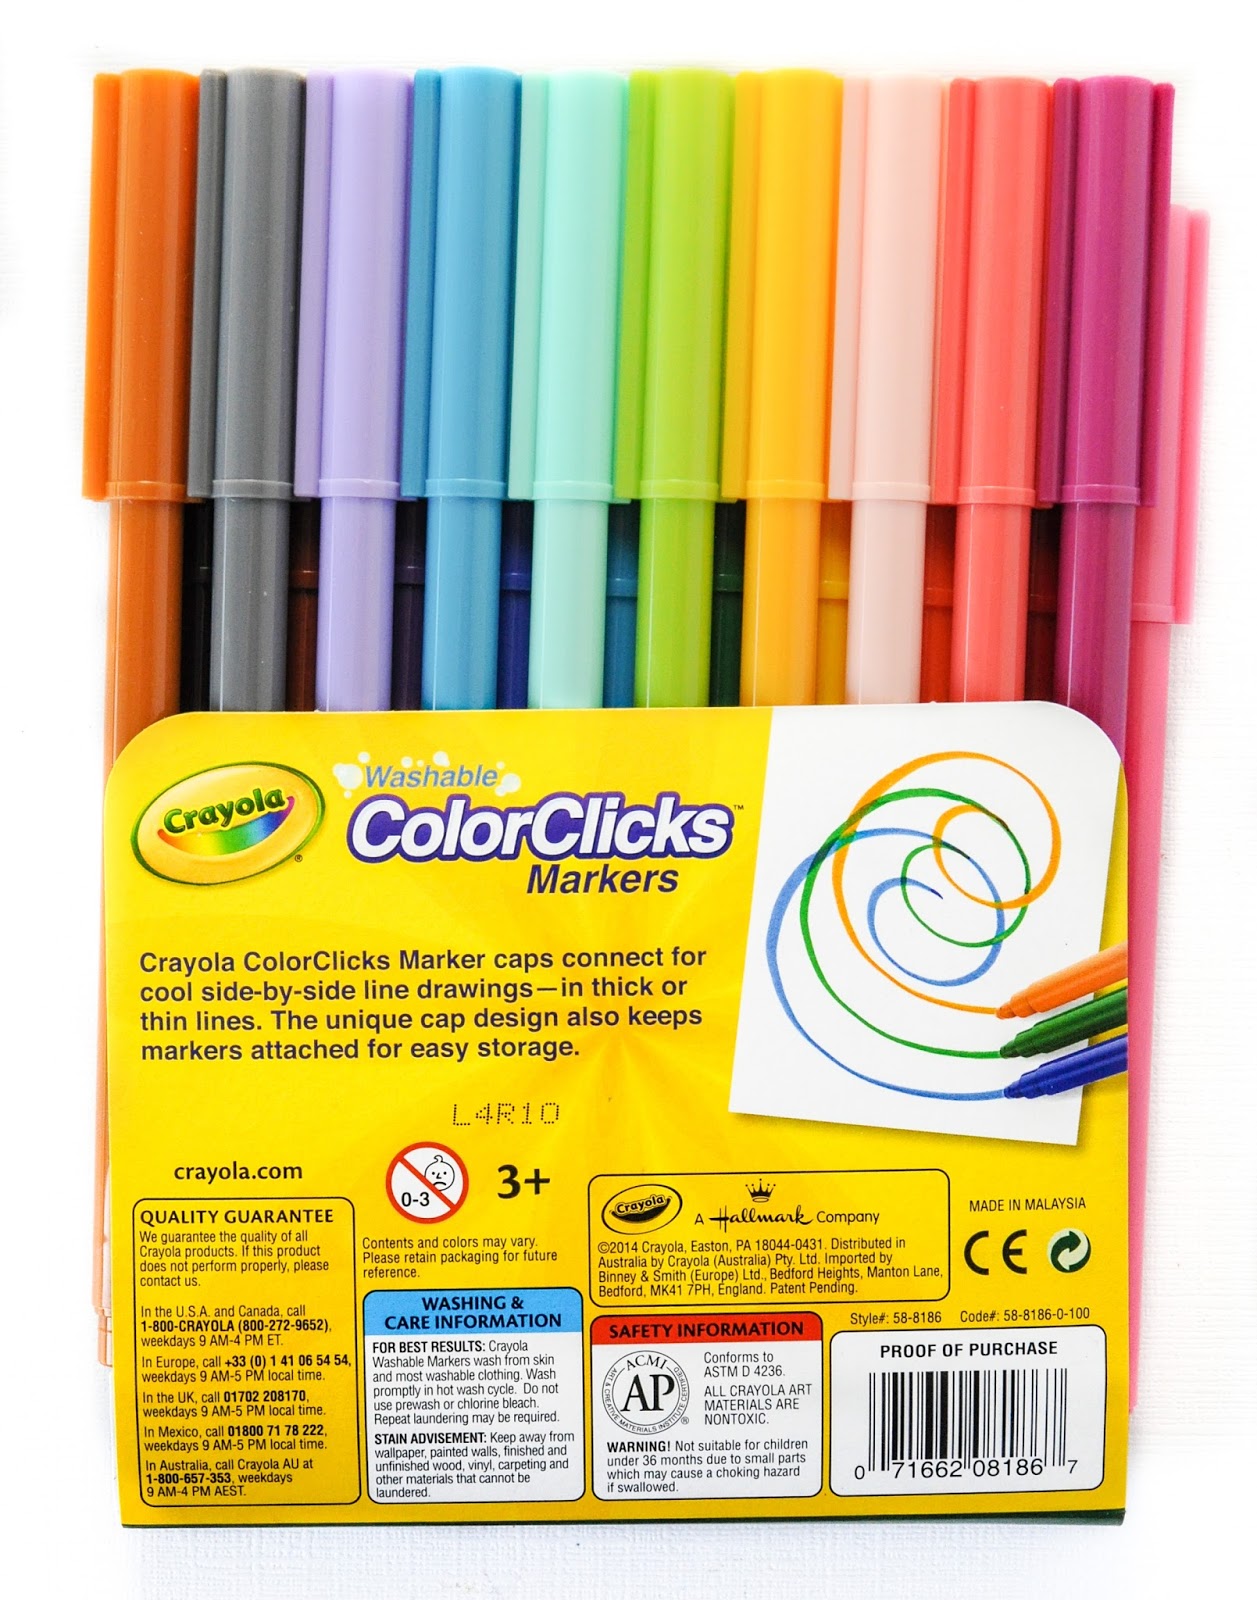 Crayola ColorClicks 20 Count Markers: What's Inside the Box